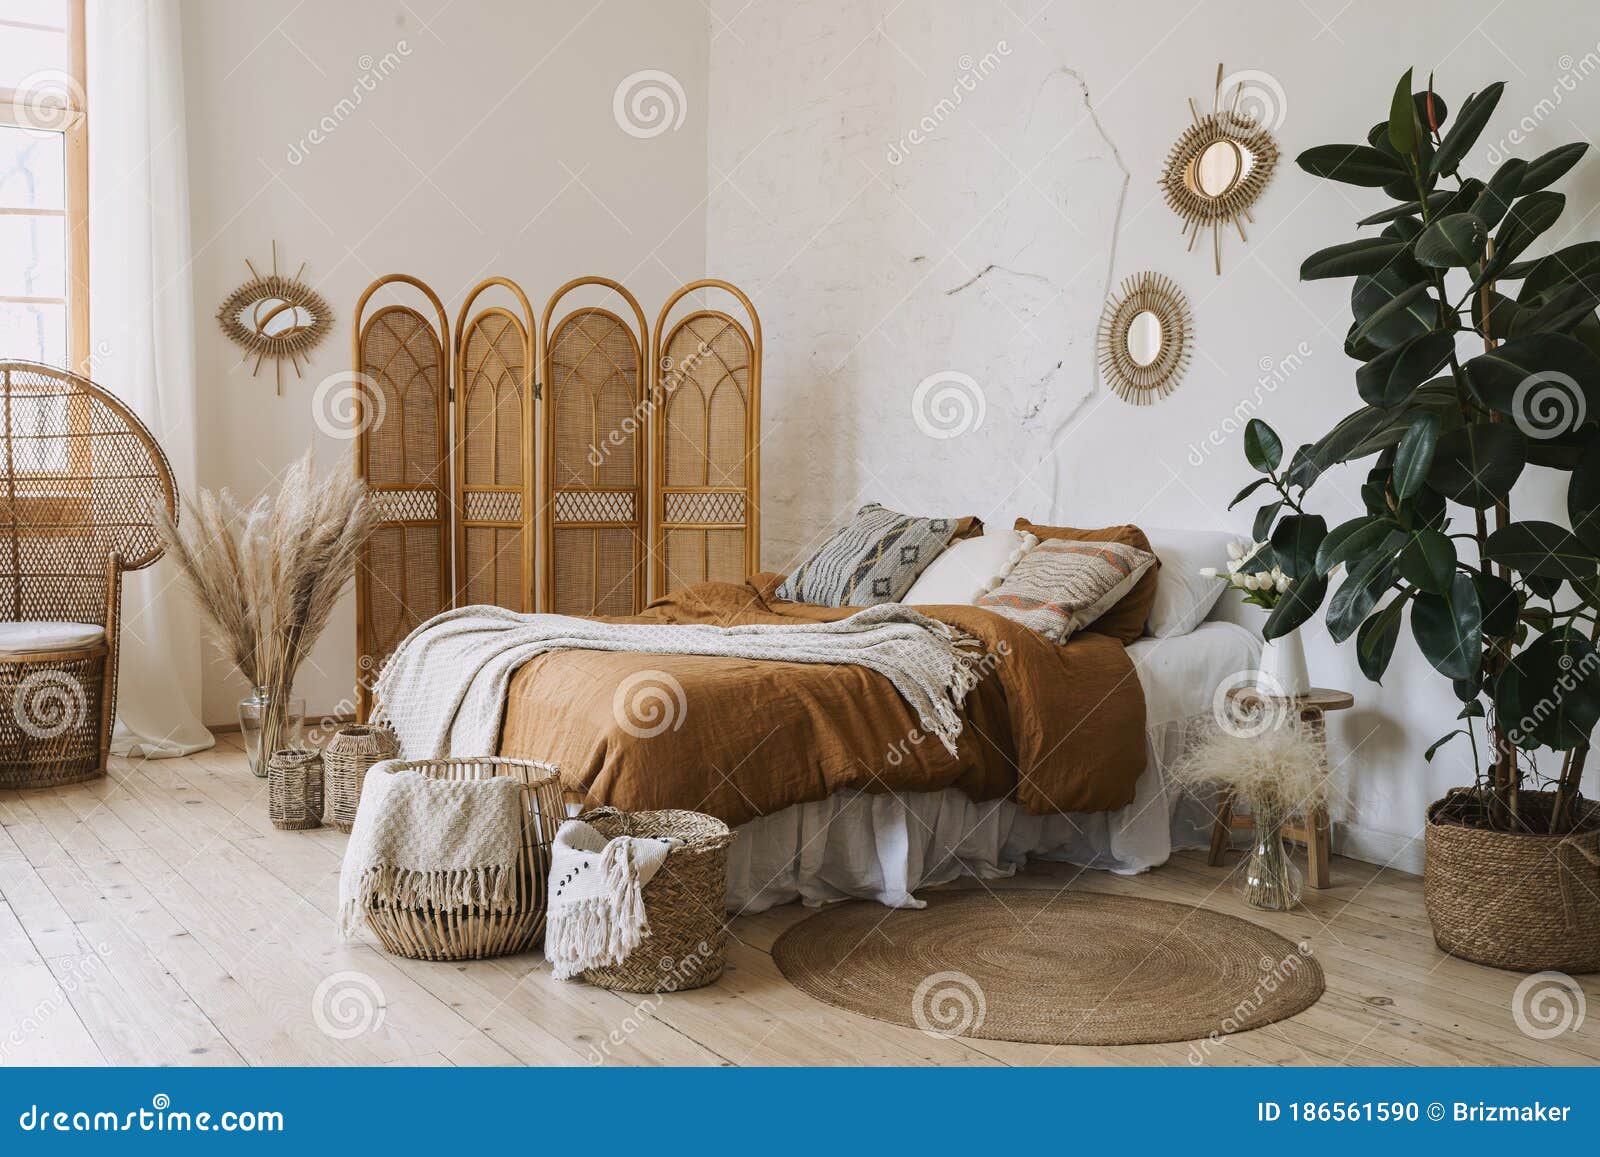 comfort apartment in bohemian style interior with hygge bedroom